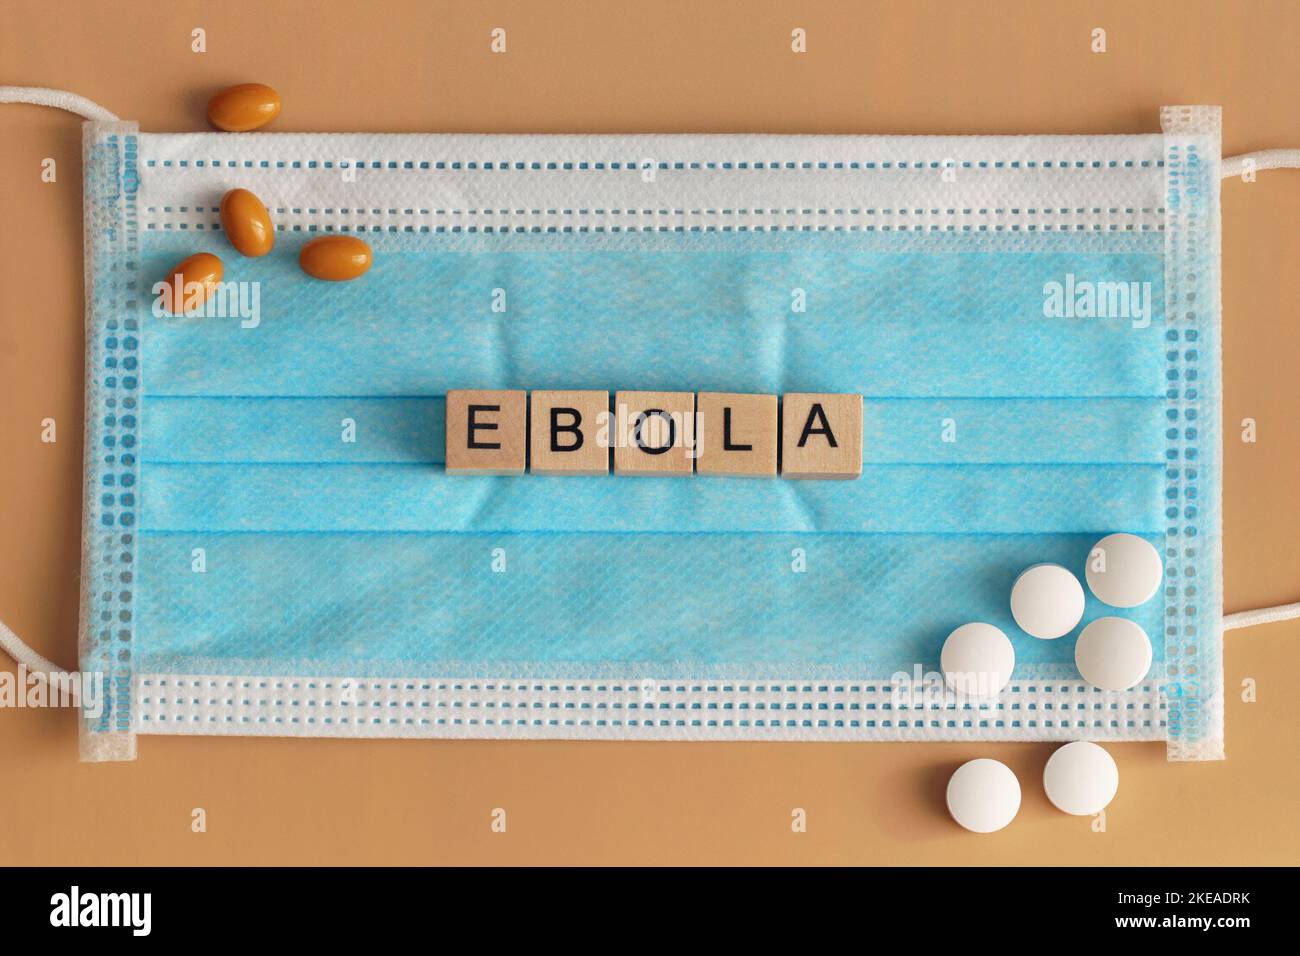 Ebola is laid out with wooden cubes on a surgical face mask. There are various pills lying around. Viral hemorrhagic fever. Stock Photo